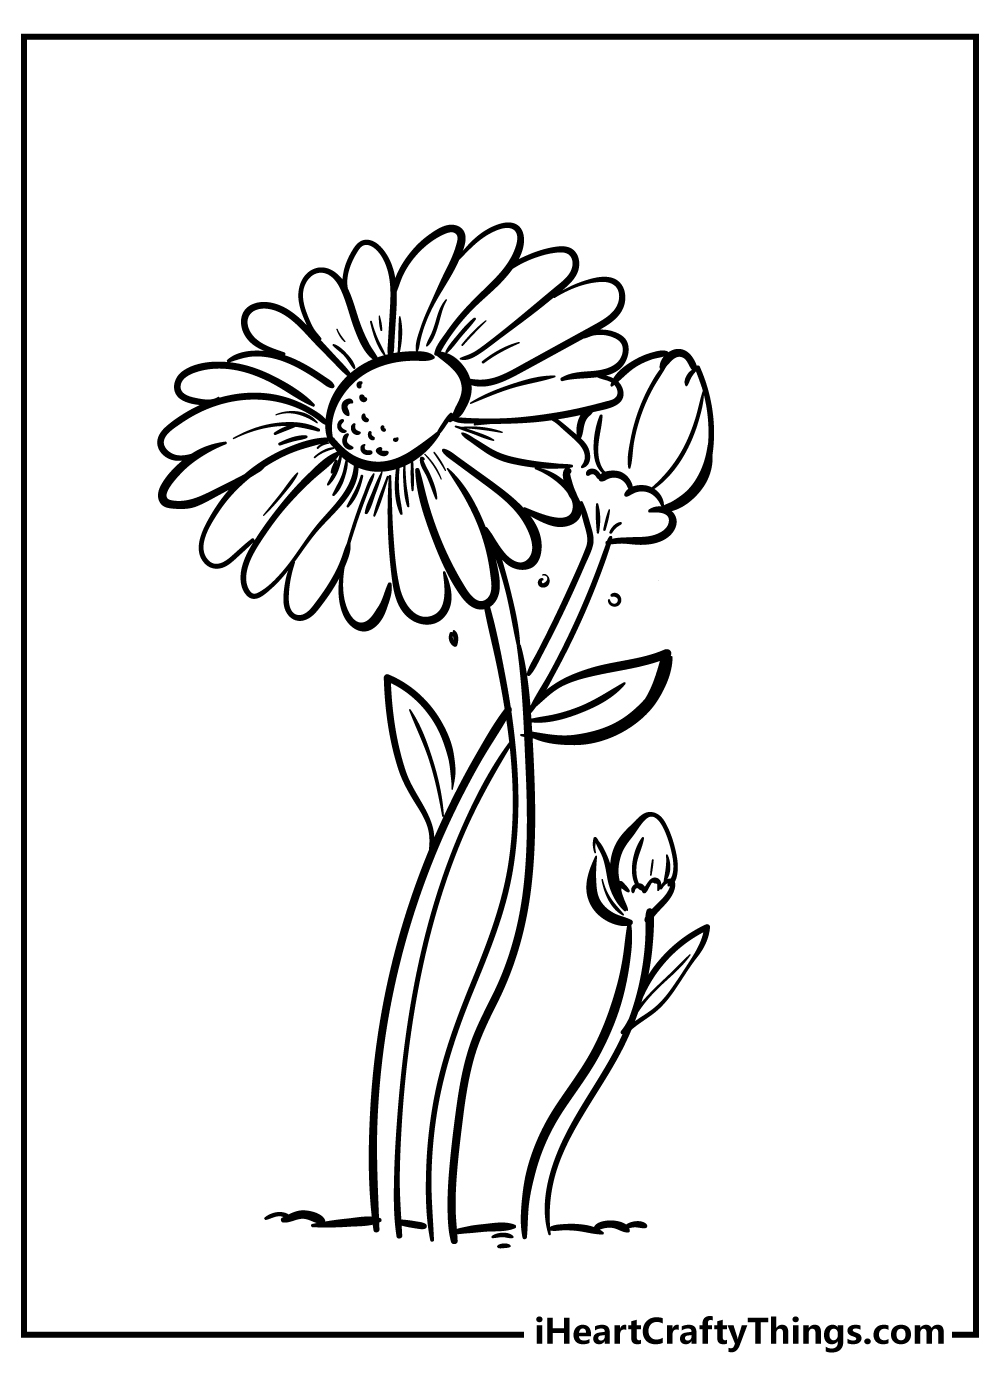 Daisy coloring pages free printables